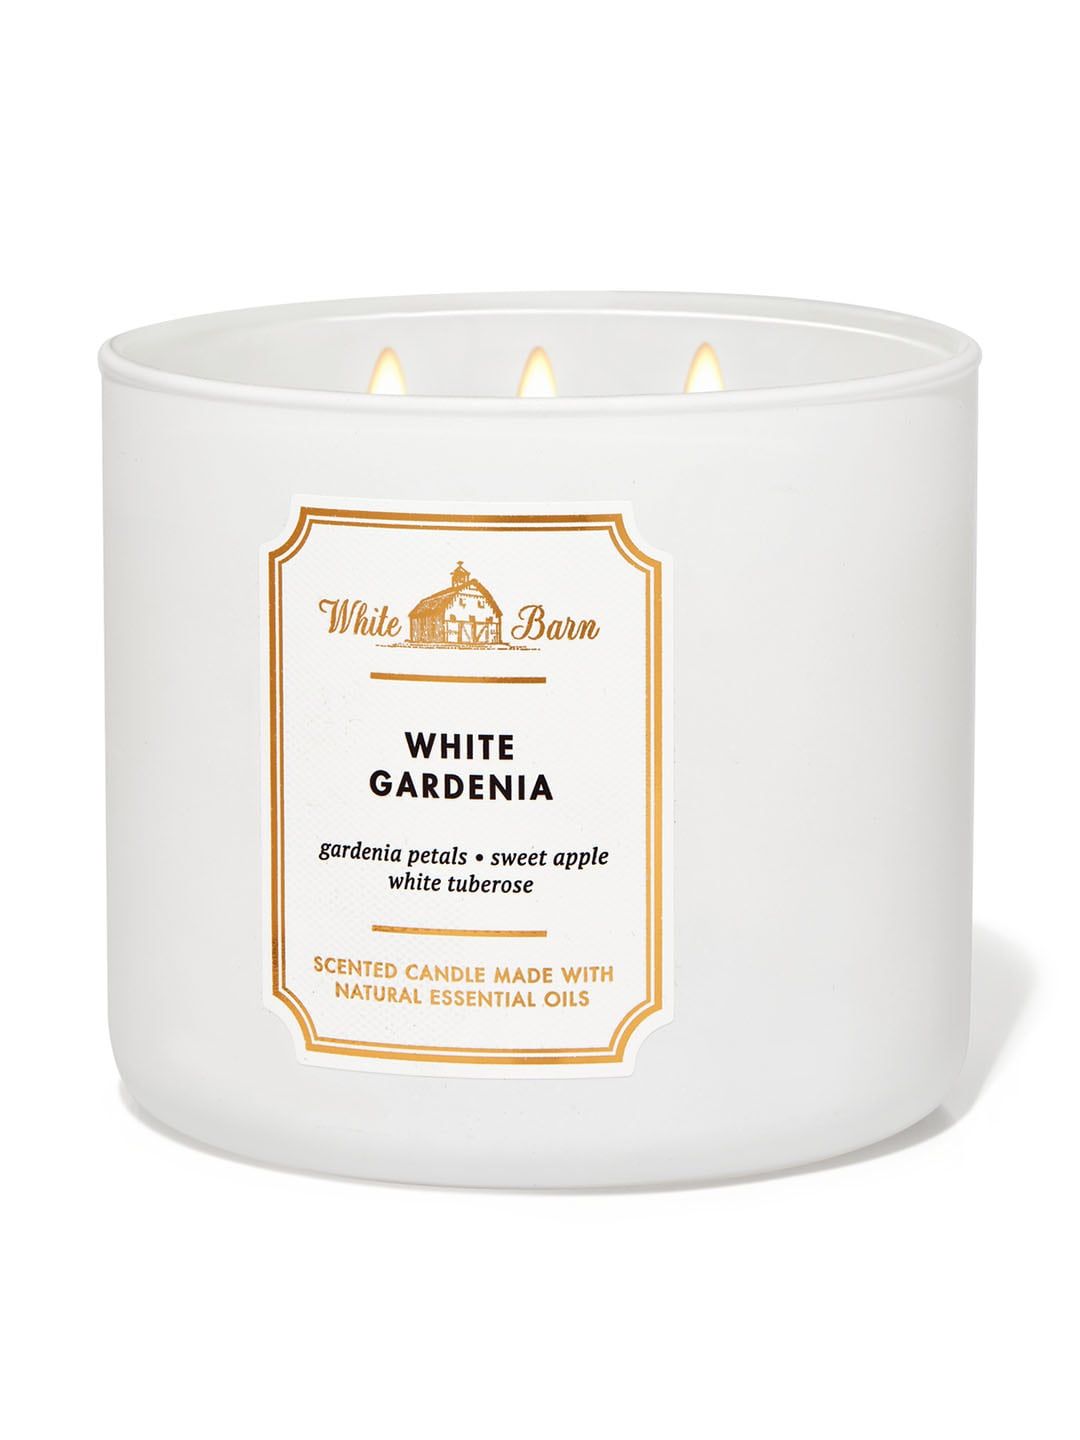 Bath & Body Works White Gardenia 3-Wick Scented Candle with Essential Oils - 411 g Price in India